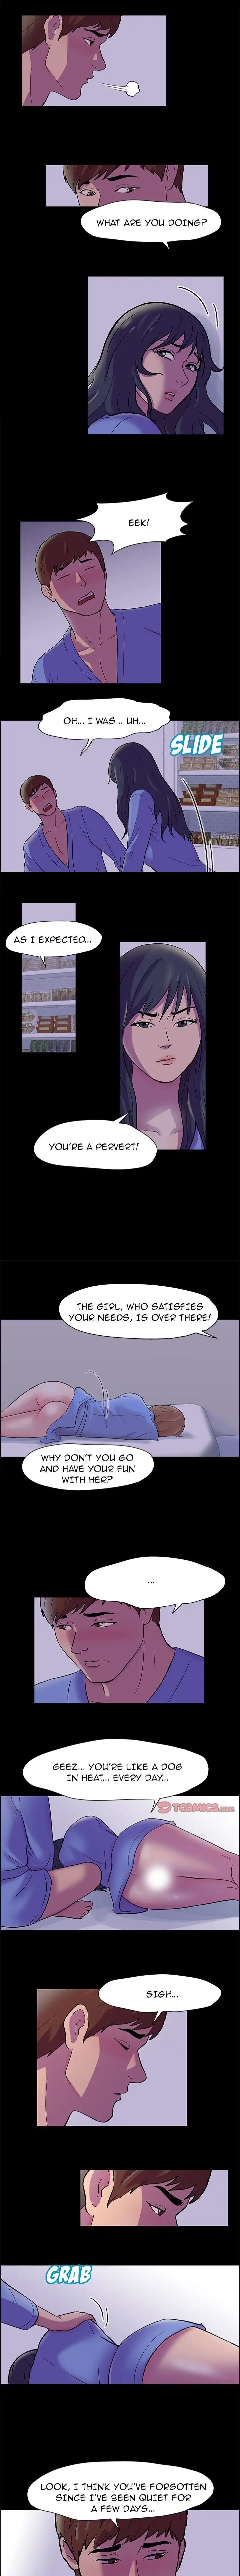 The White Room - Chapter 18 Page 2